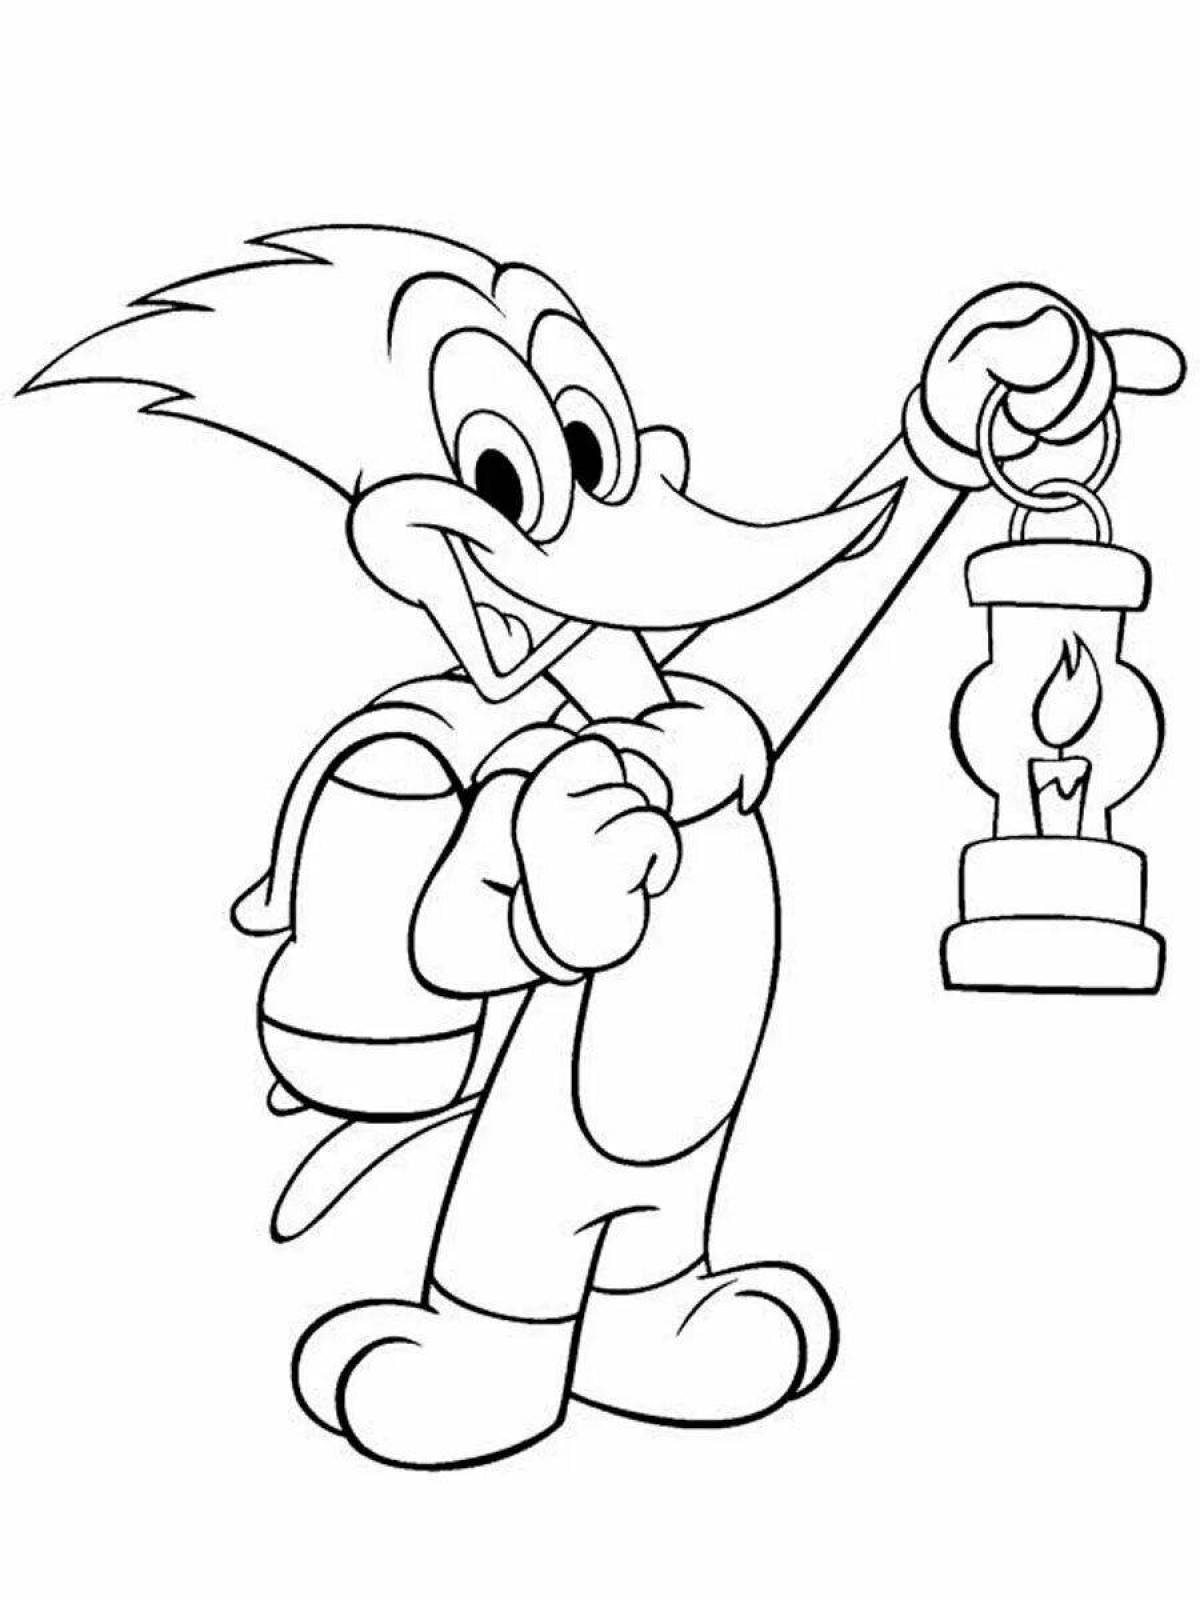 Animated woody woodpecker coloring page